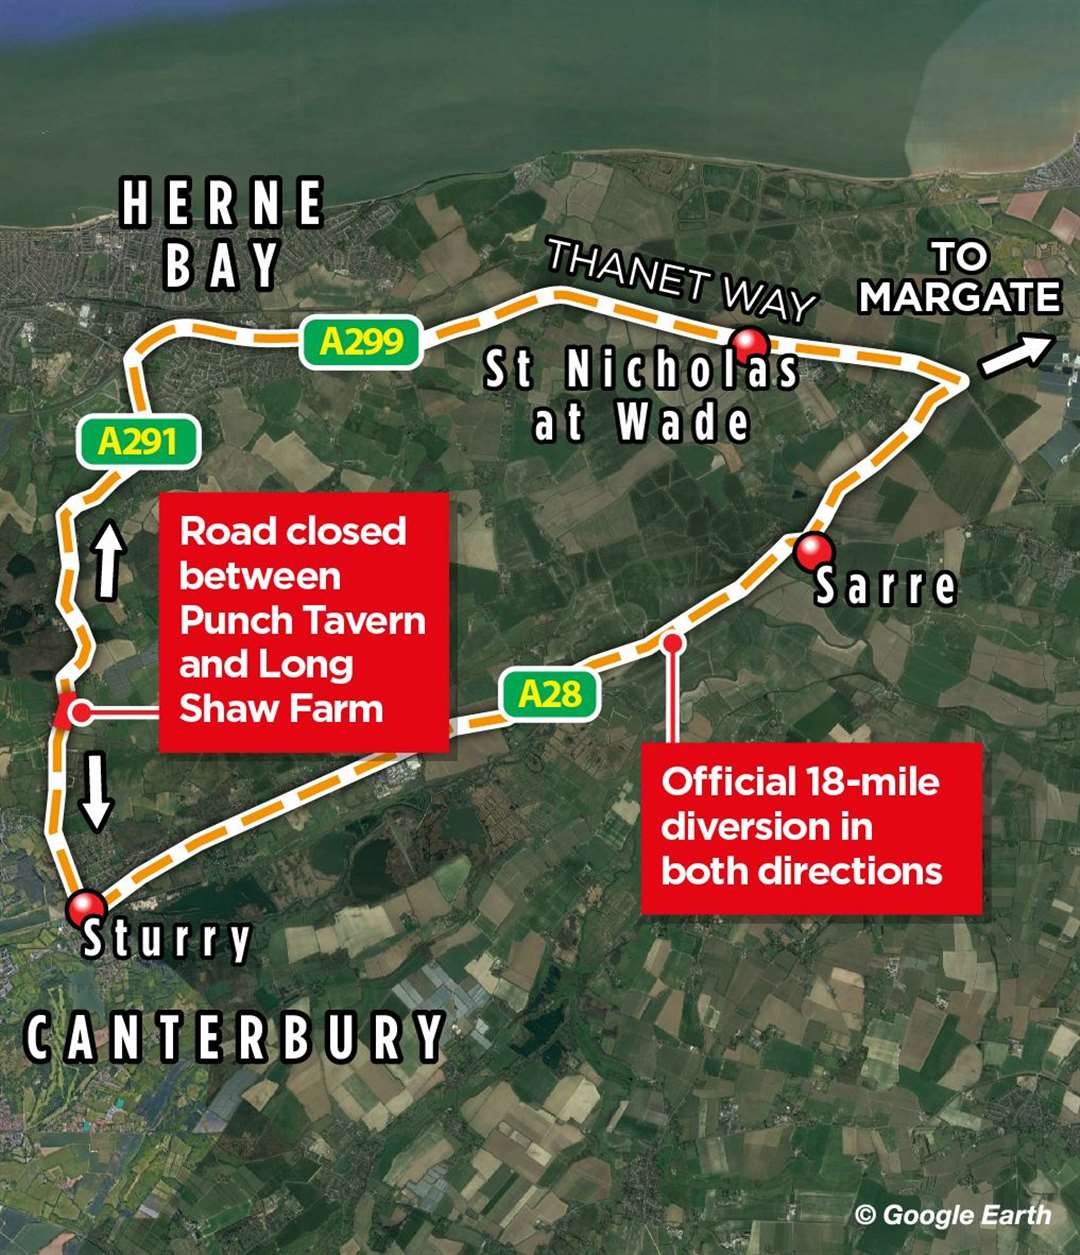 The 18-mile diversion to avoid the A291 closure between Herne Bay and Canterbury